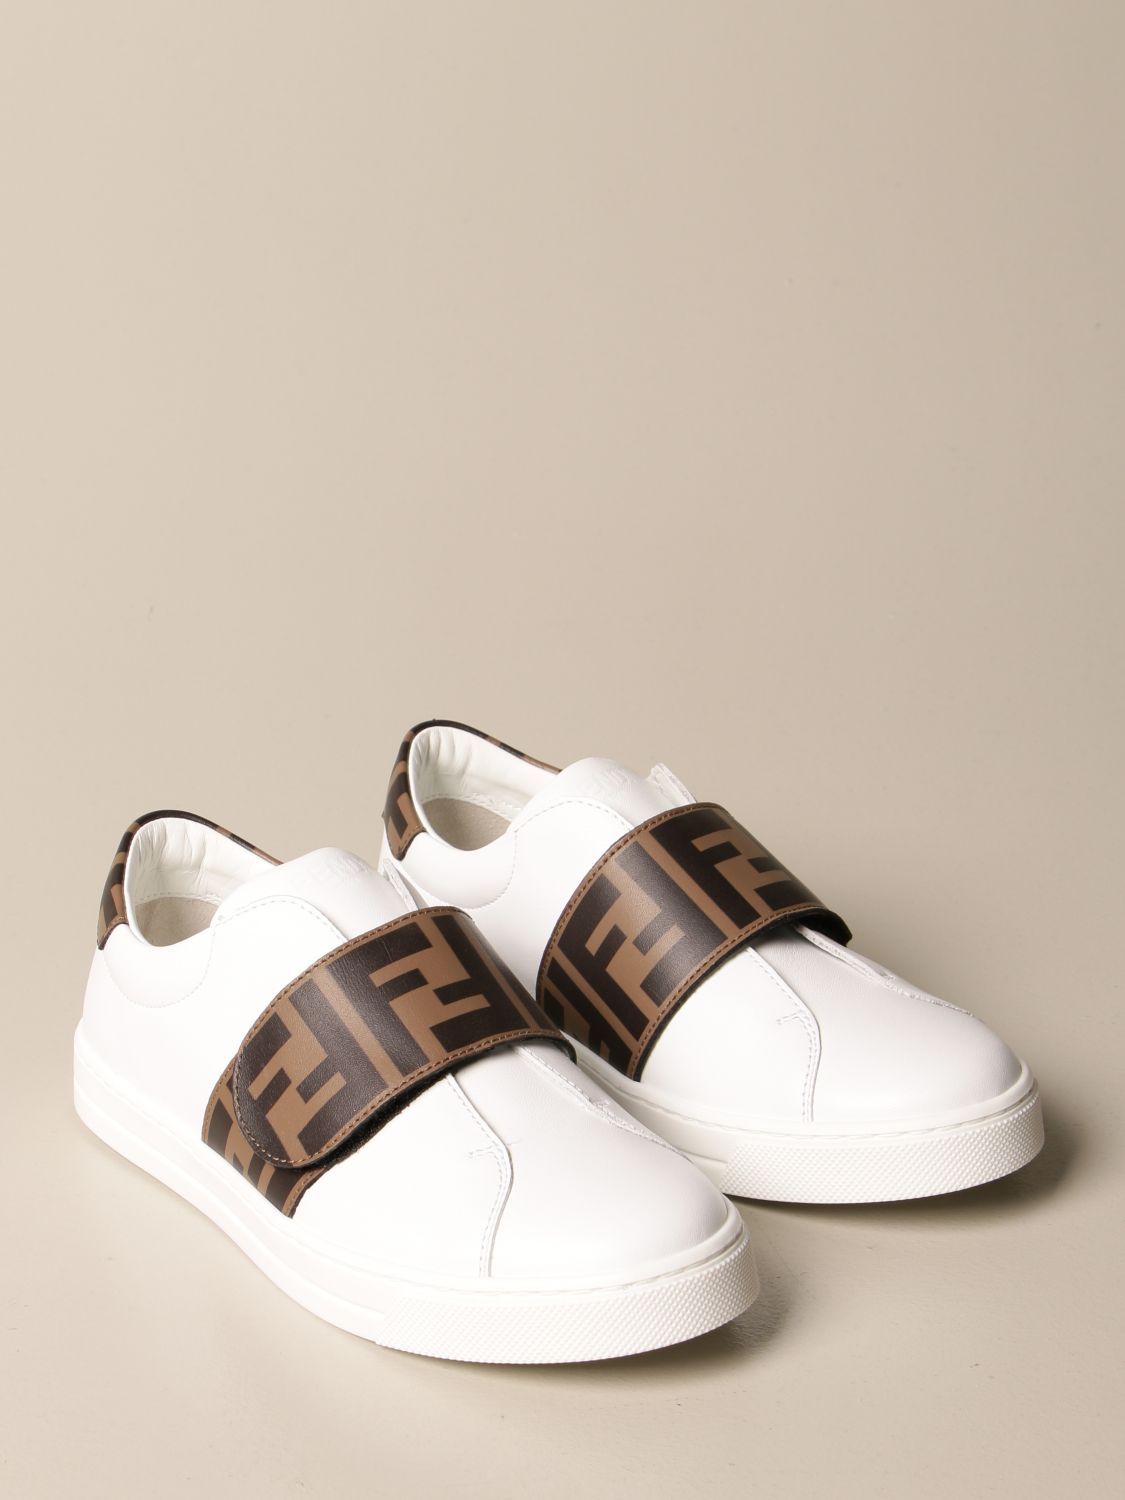 FENDI: slip on sneakers in leather with FF band - White | Shoes Fendi ...